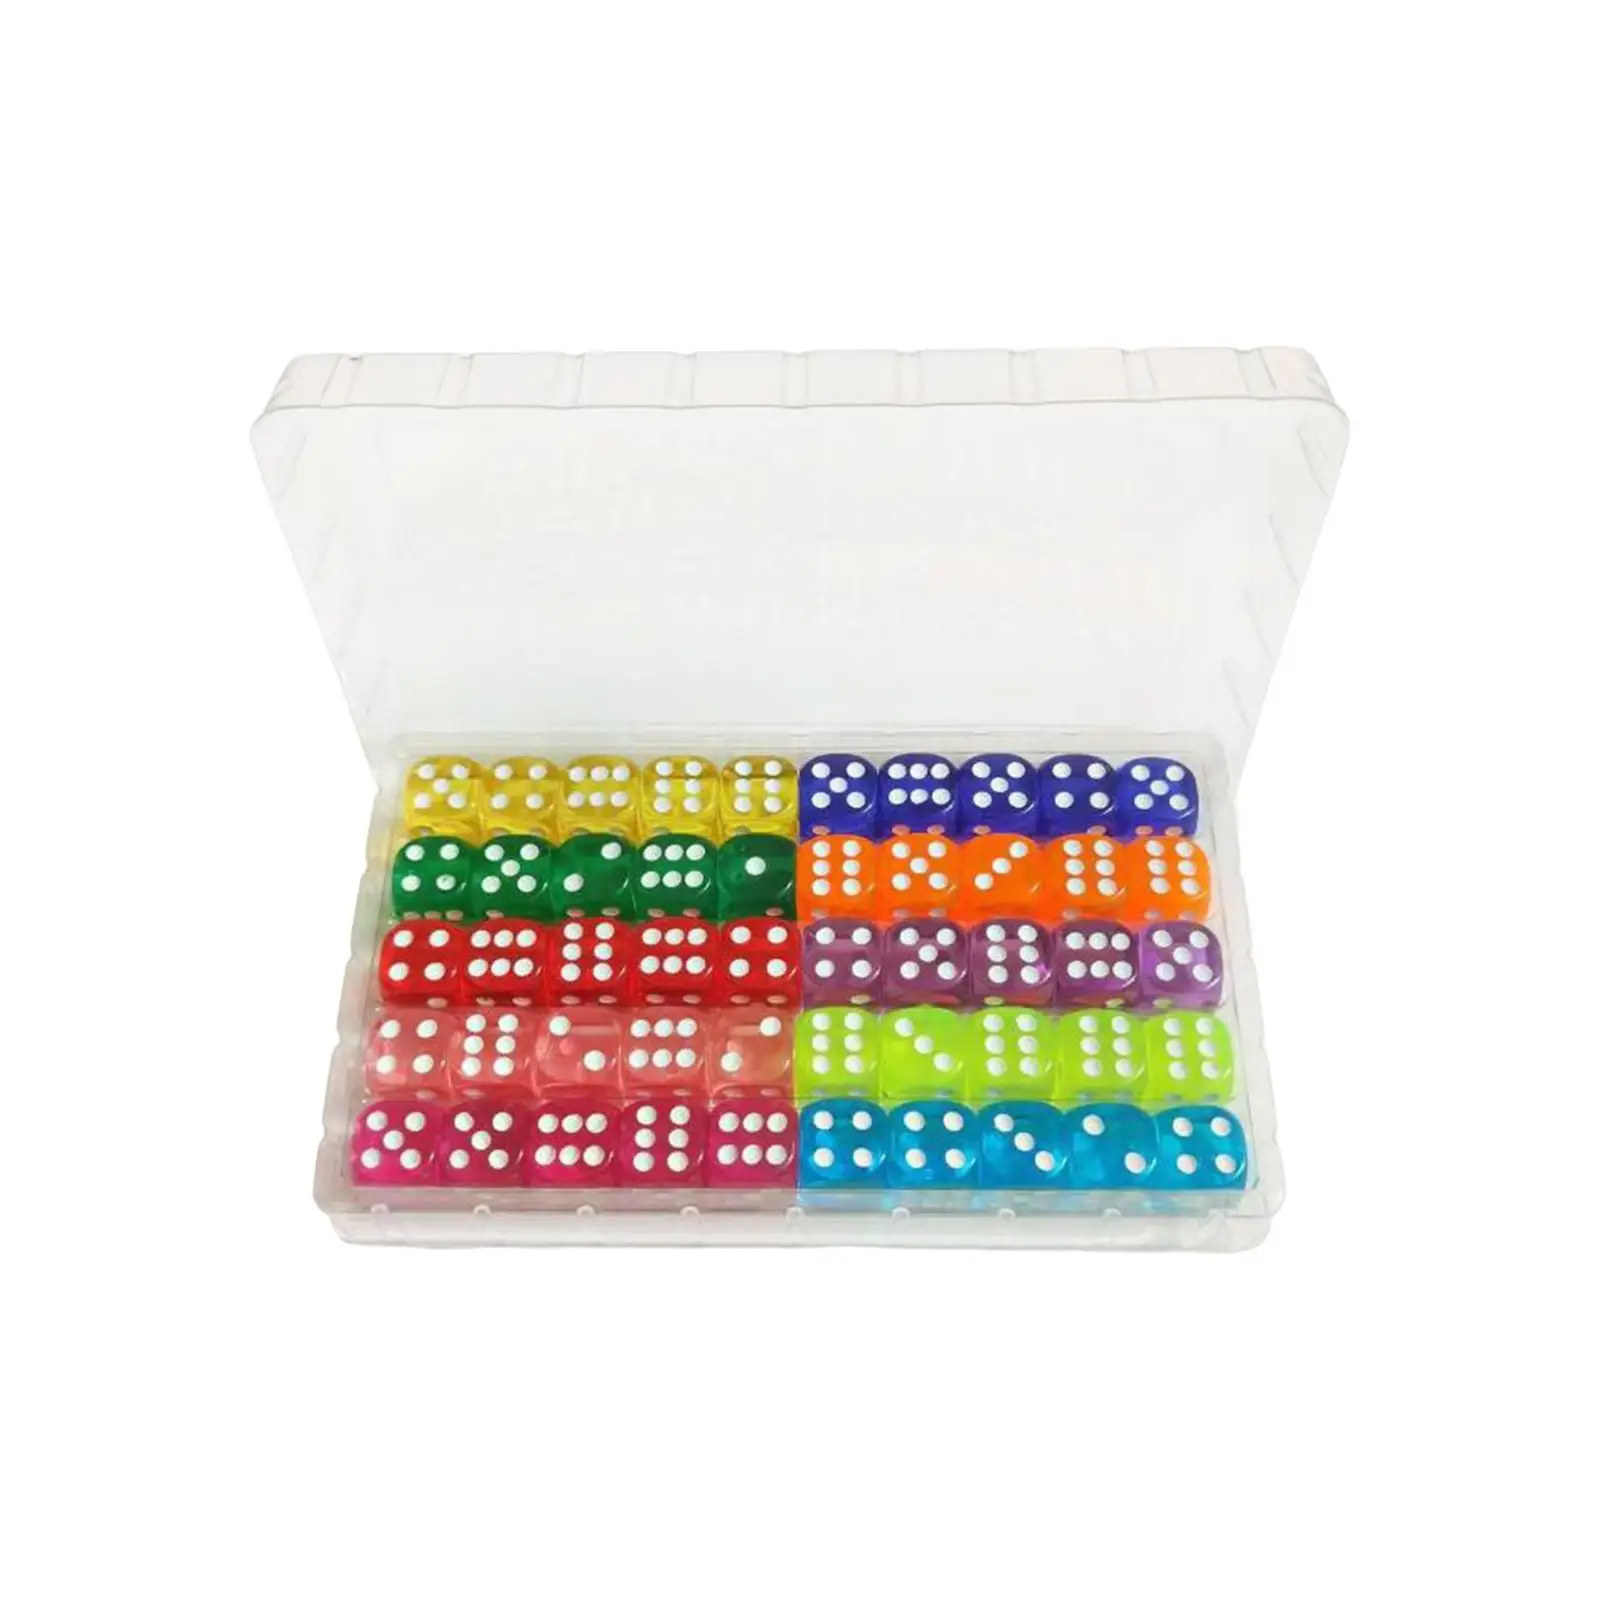 50 Pieces 6 Sided Dices Set 16mm Dices Game Dices Math Counting Teaching Aids Entertainment Toys for Bar Card Game Table Game